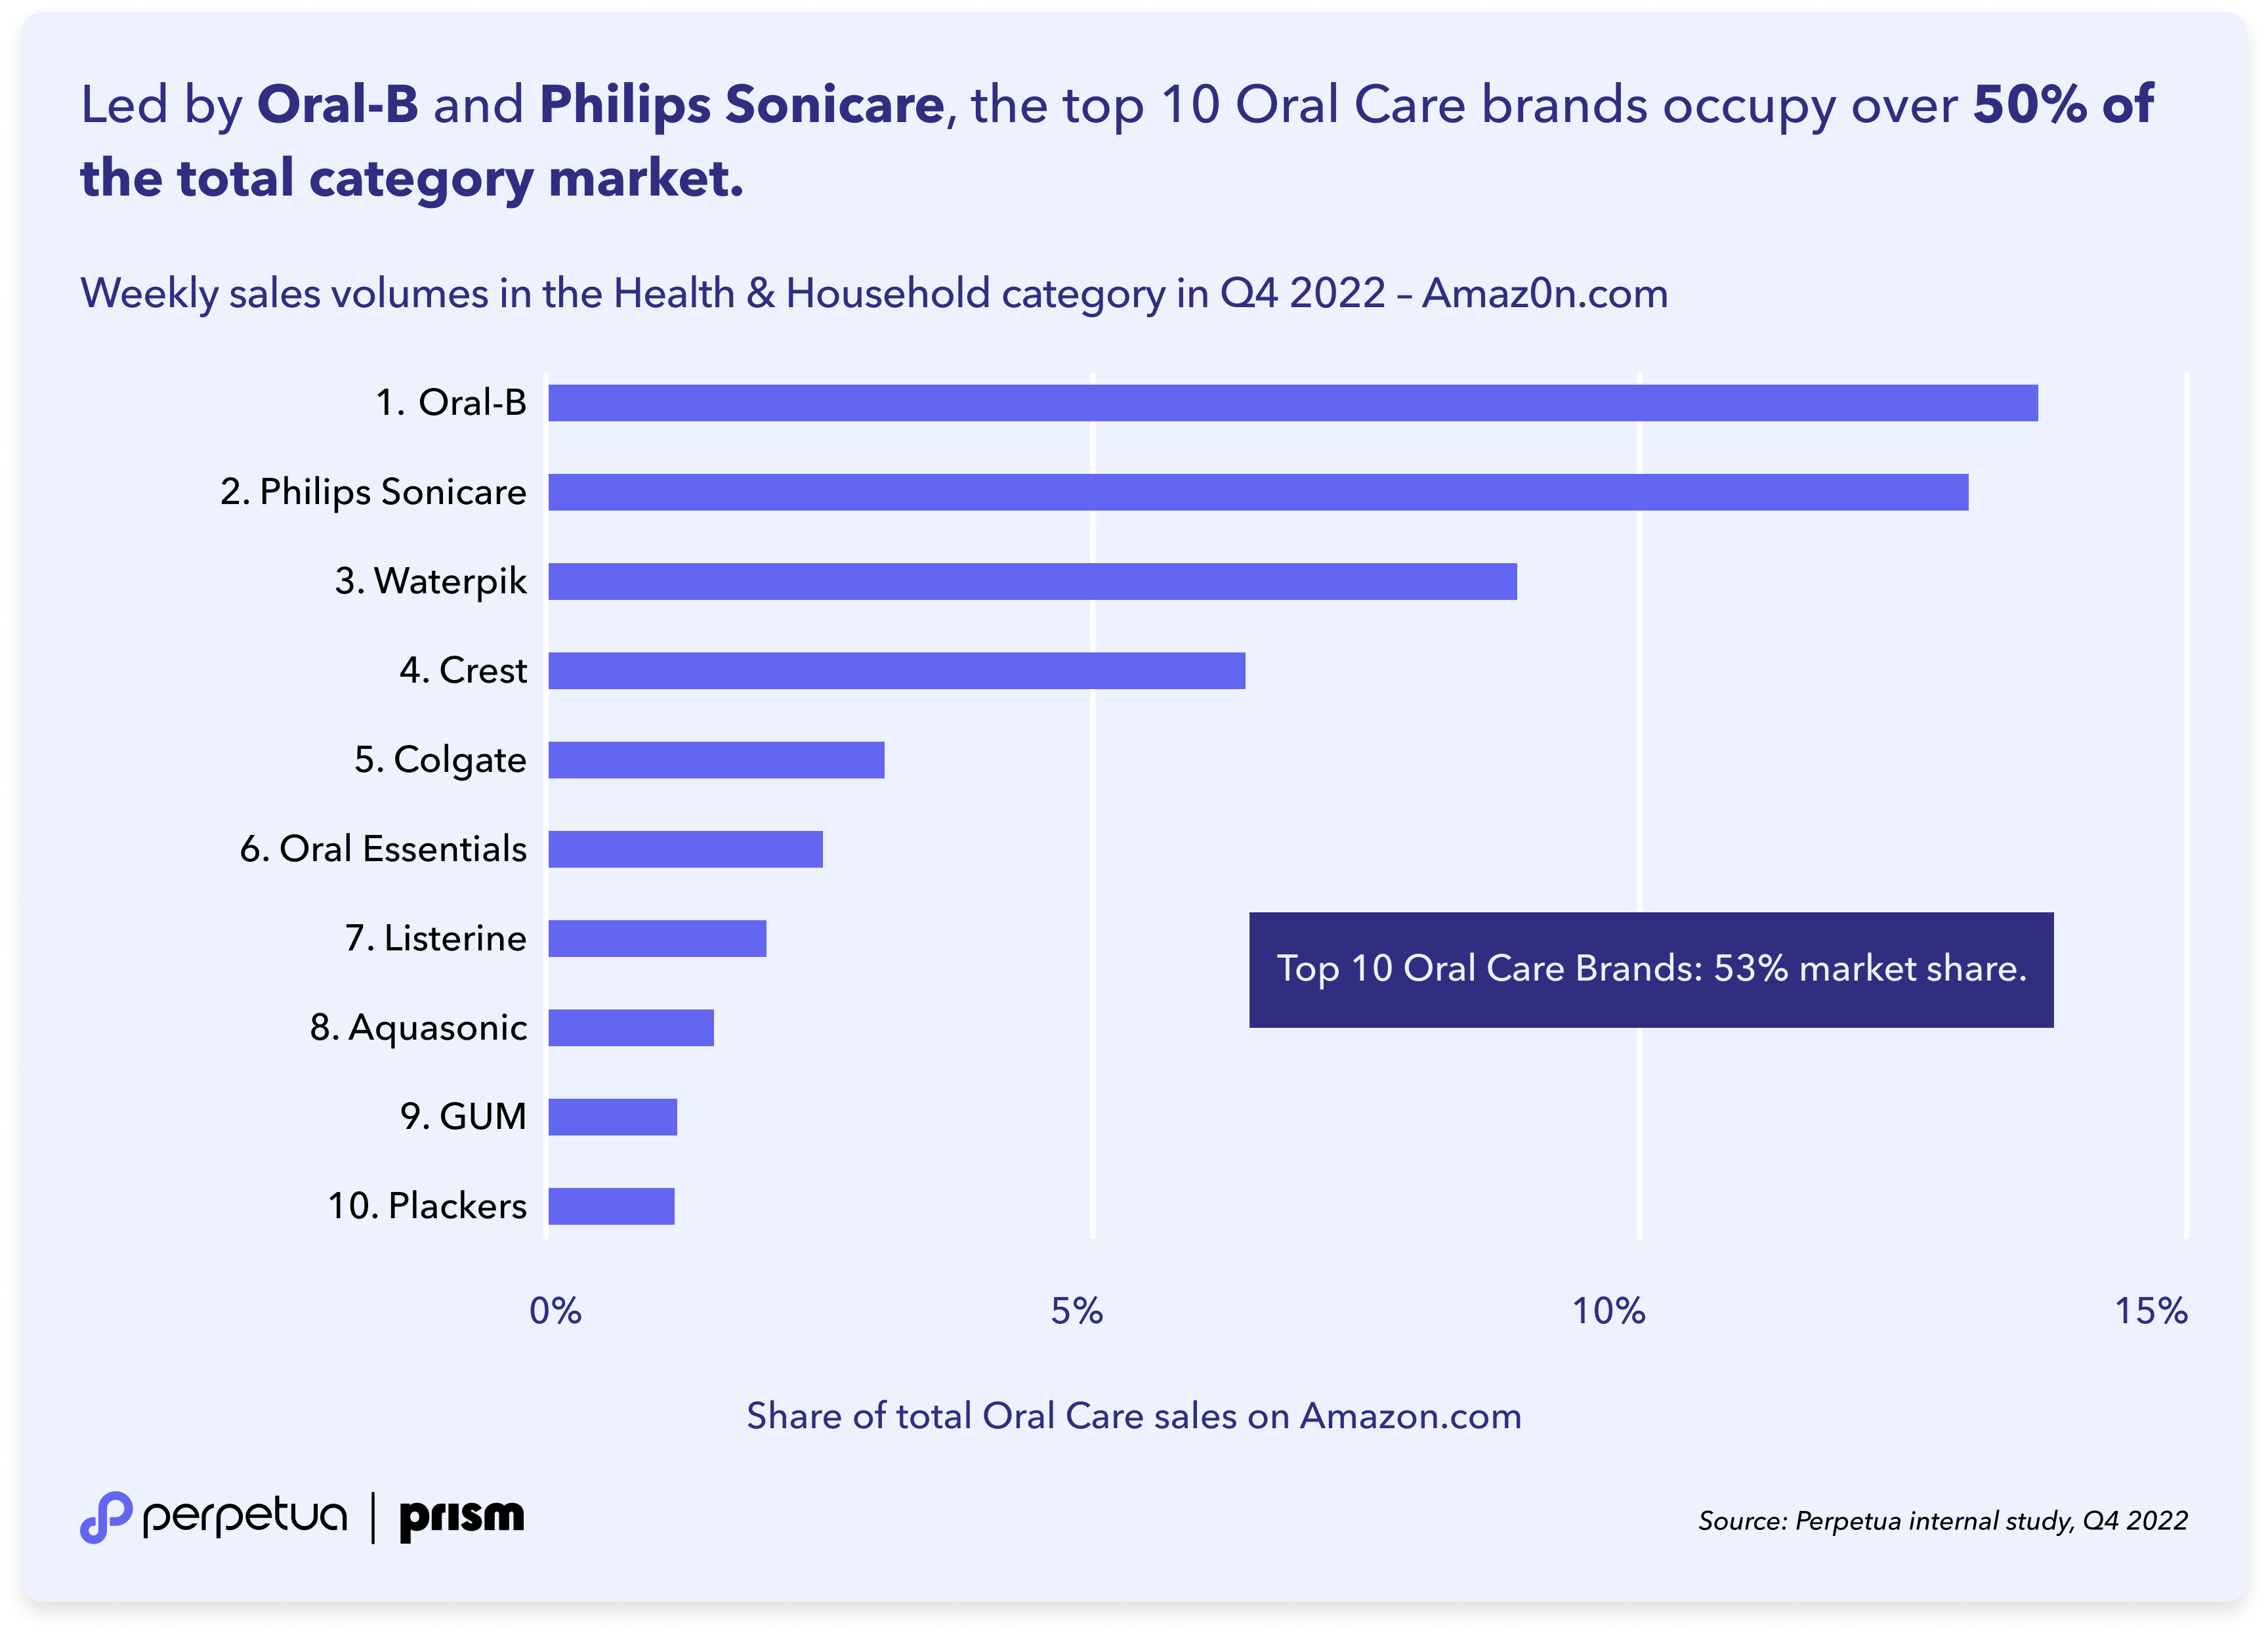 7-Perpetua Prism — Led by Oral-B and Philips Sonicare, the top 10 Oral Care brands occupy over 50- of the total category market share